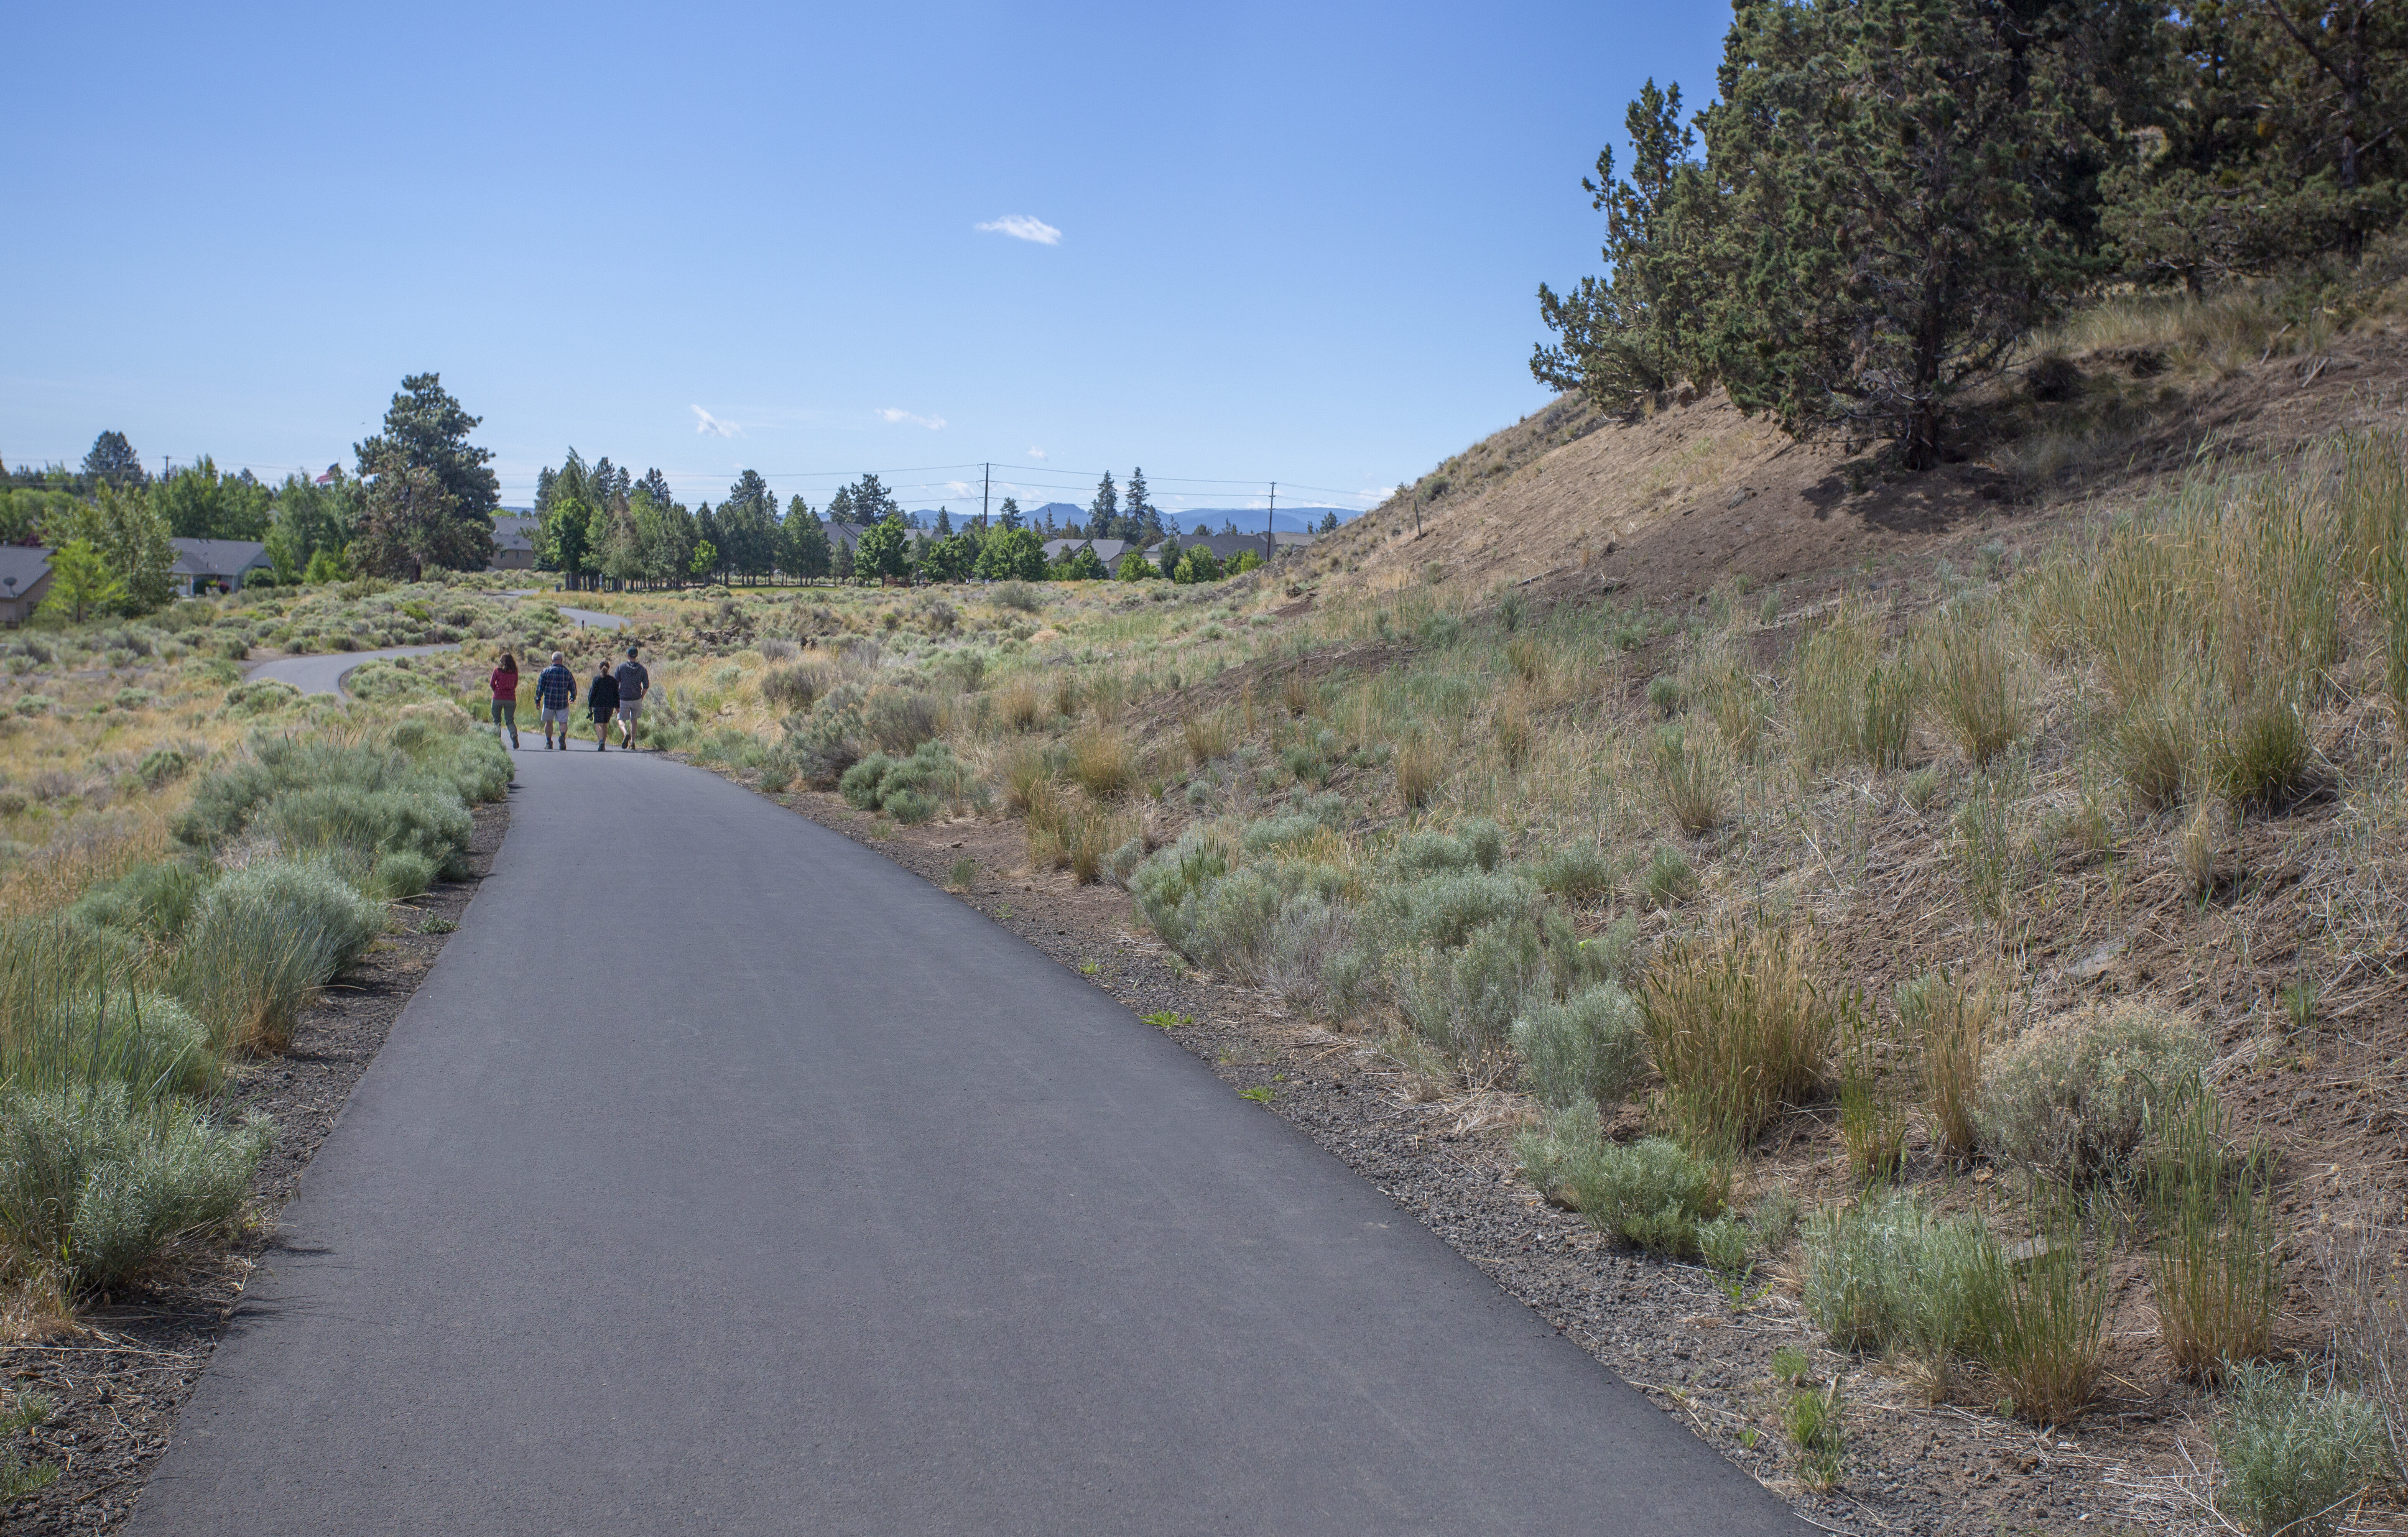 The Larkspur Trail in the natural area at Pilot Butte Park